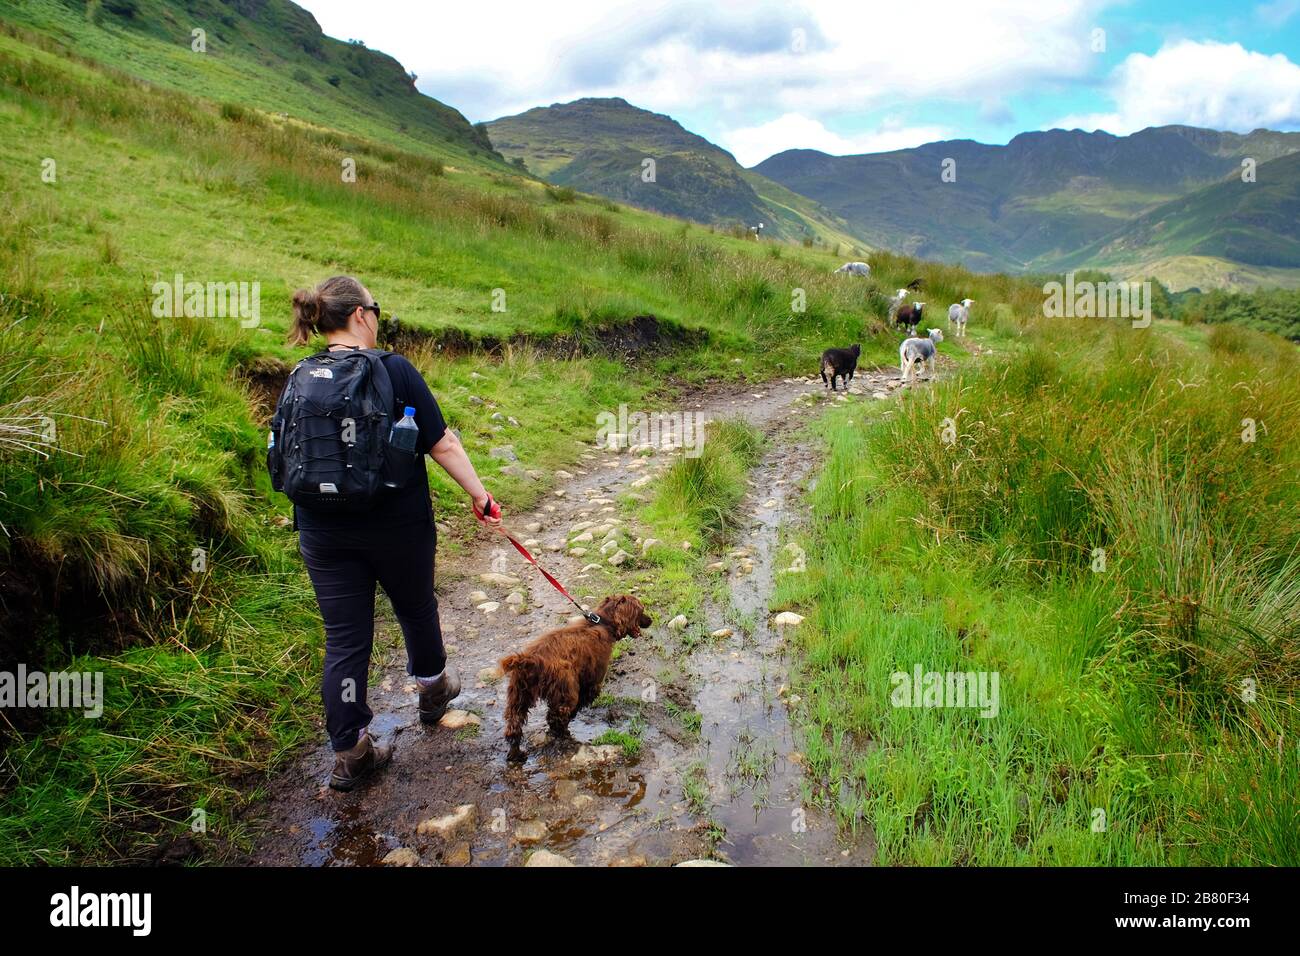 Hiking with a dog in Langdale valley, in the English Lake District, Cumbria. Stock Photo